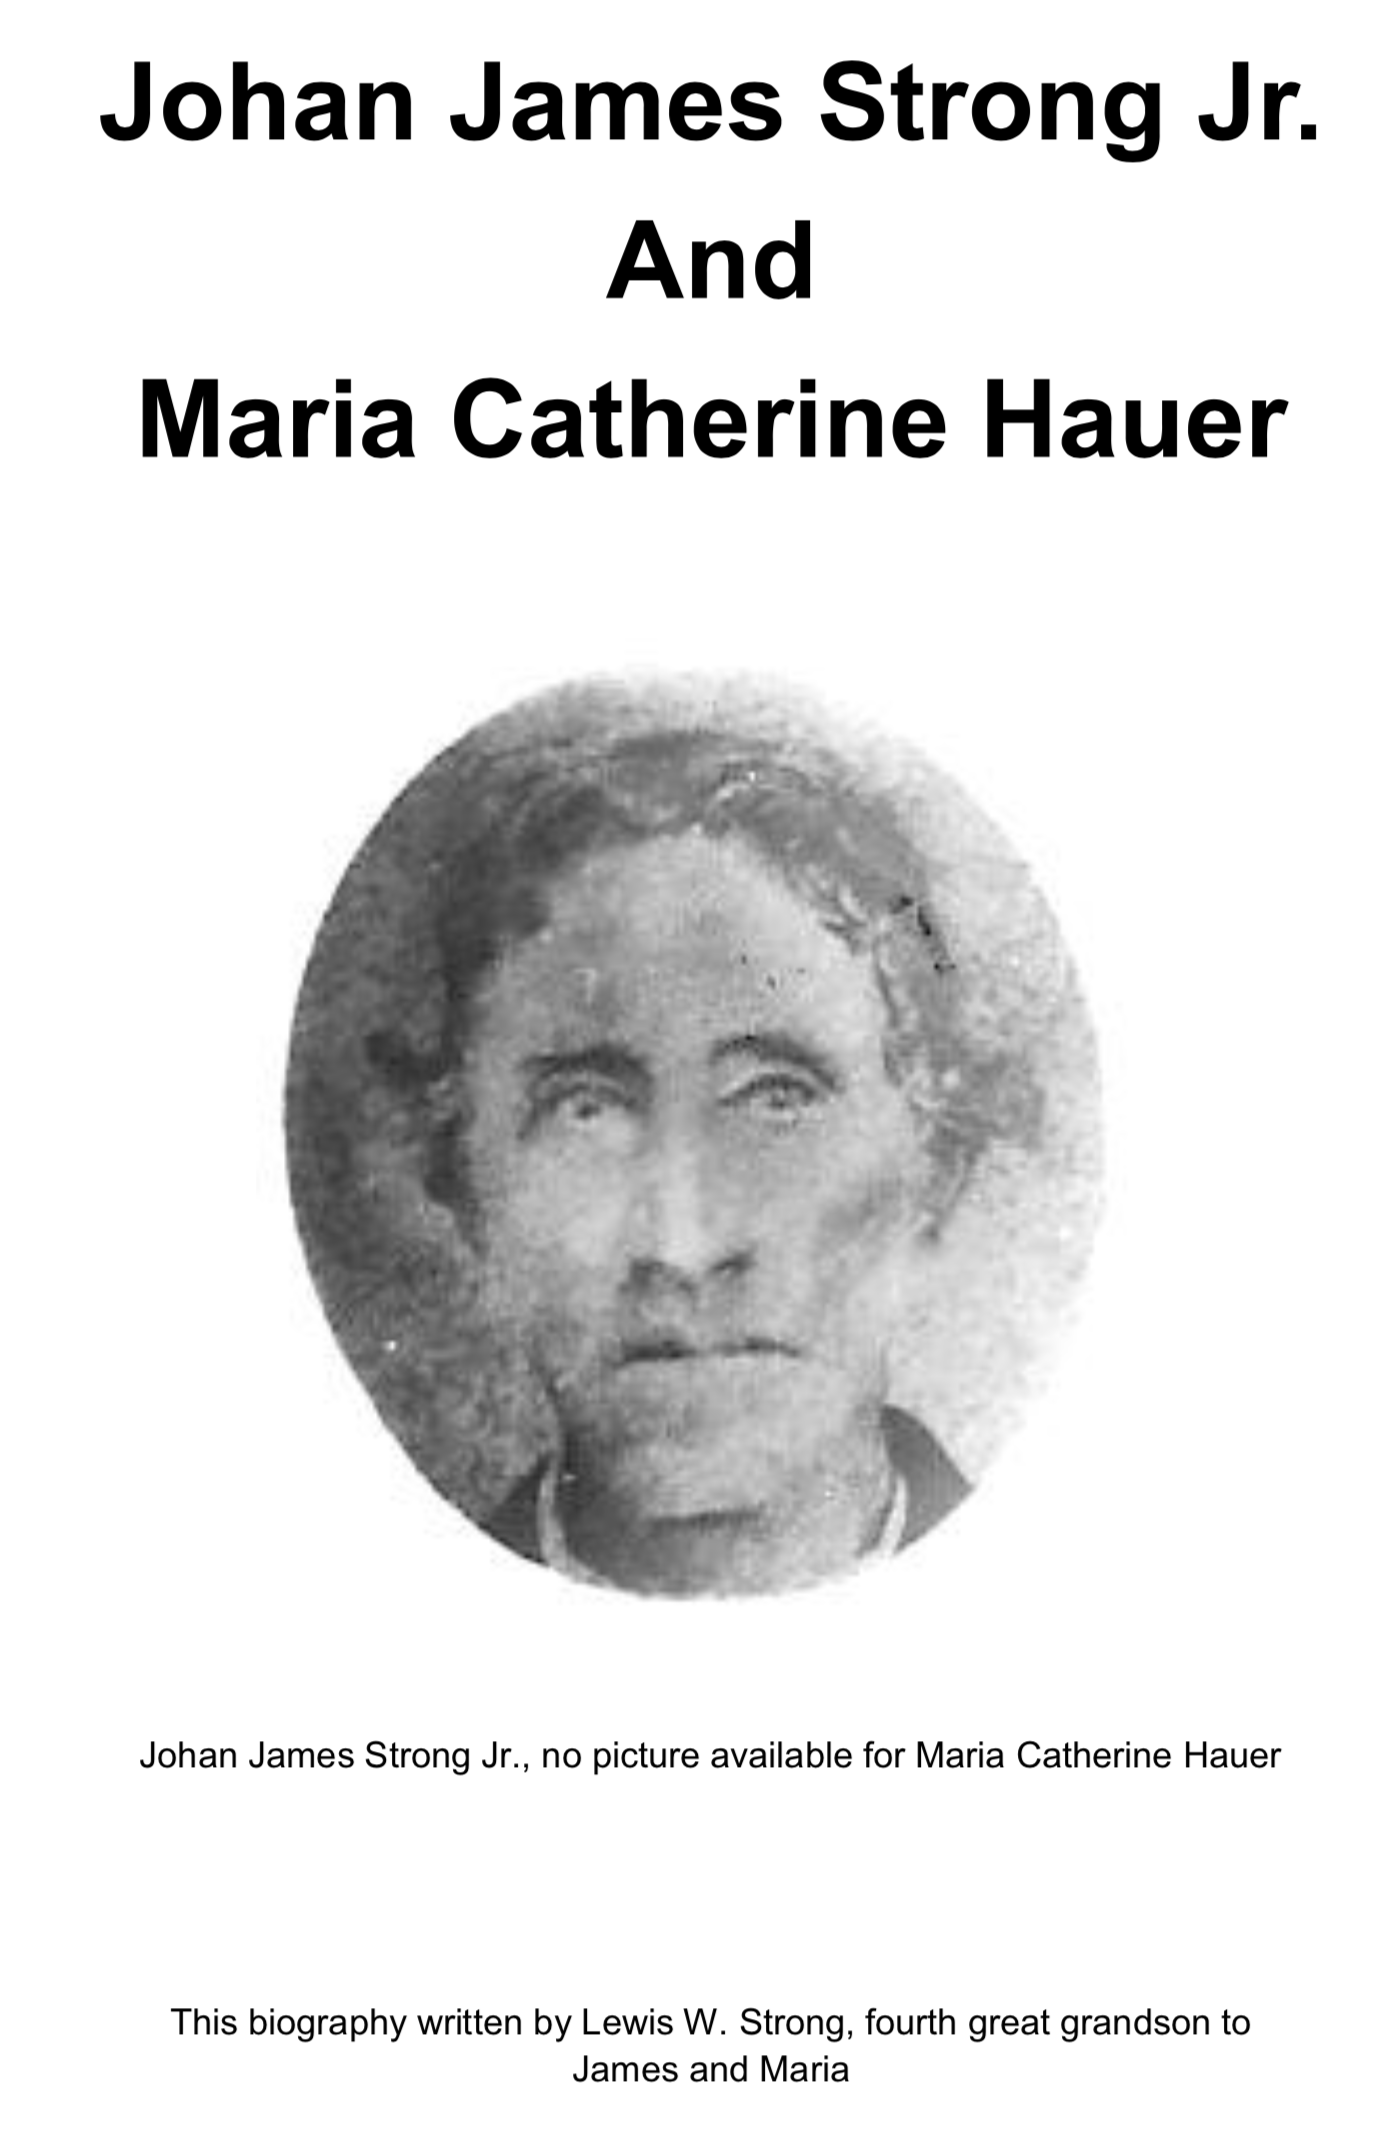 Johan James Strong Jr. and Maria Catherine Hauer